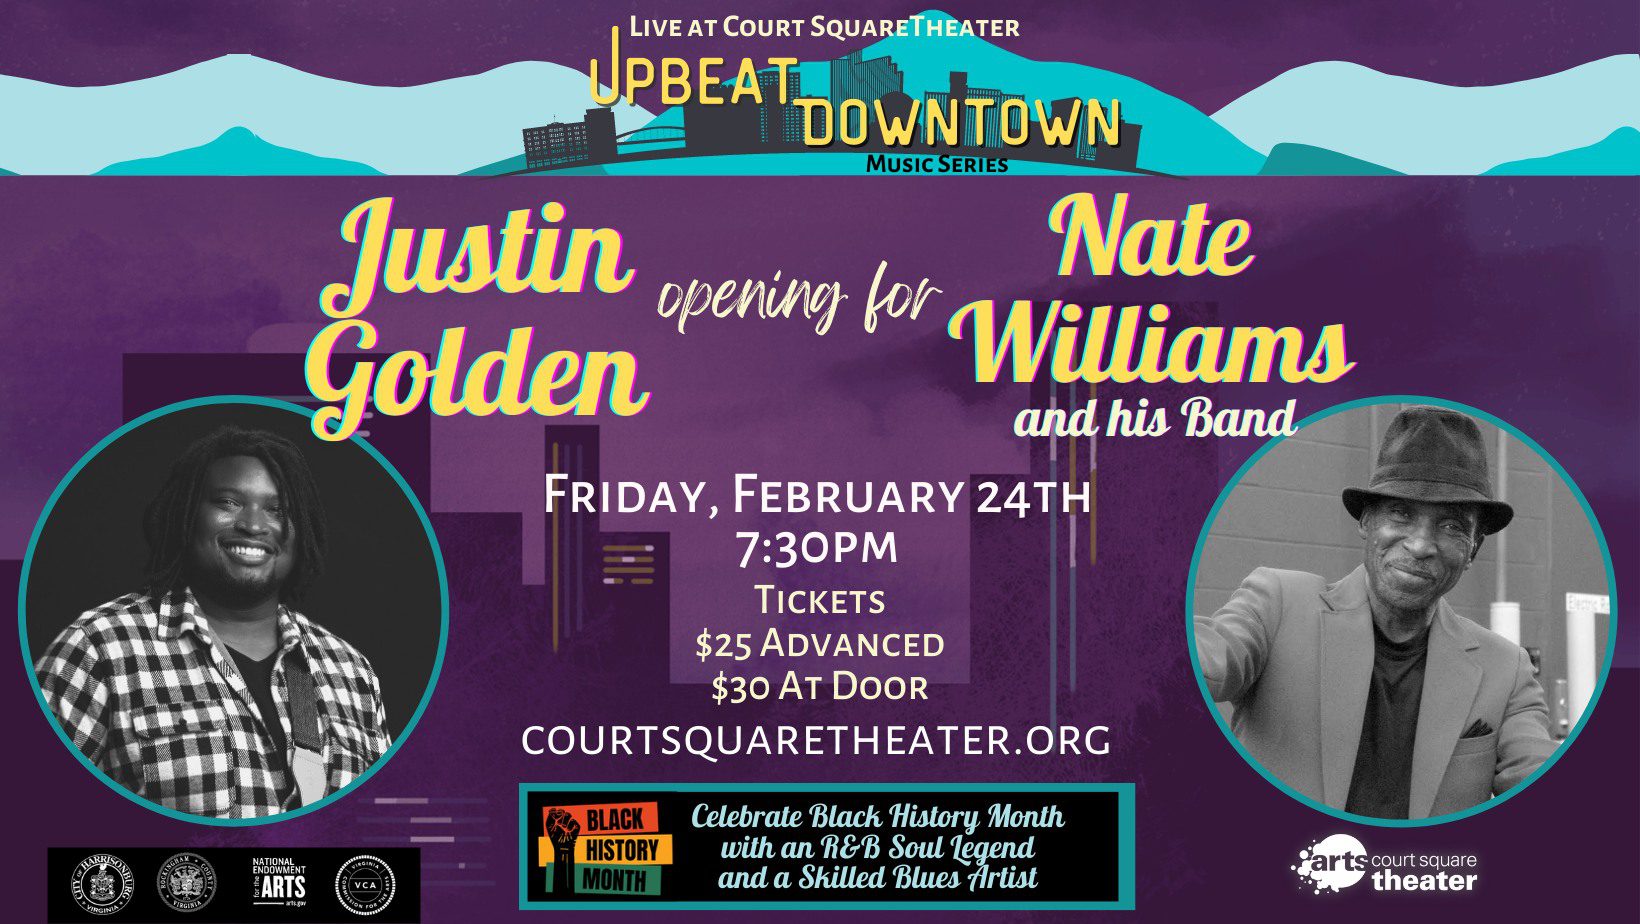 Justin Golden Opening For Nate Williams And His Band